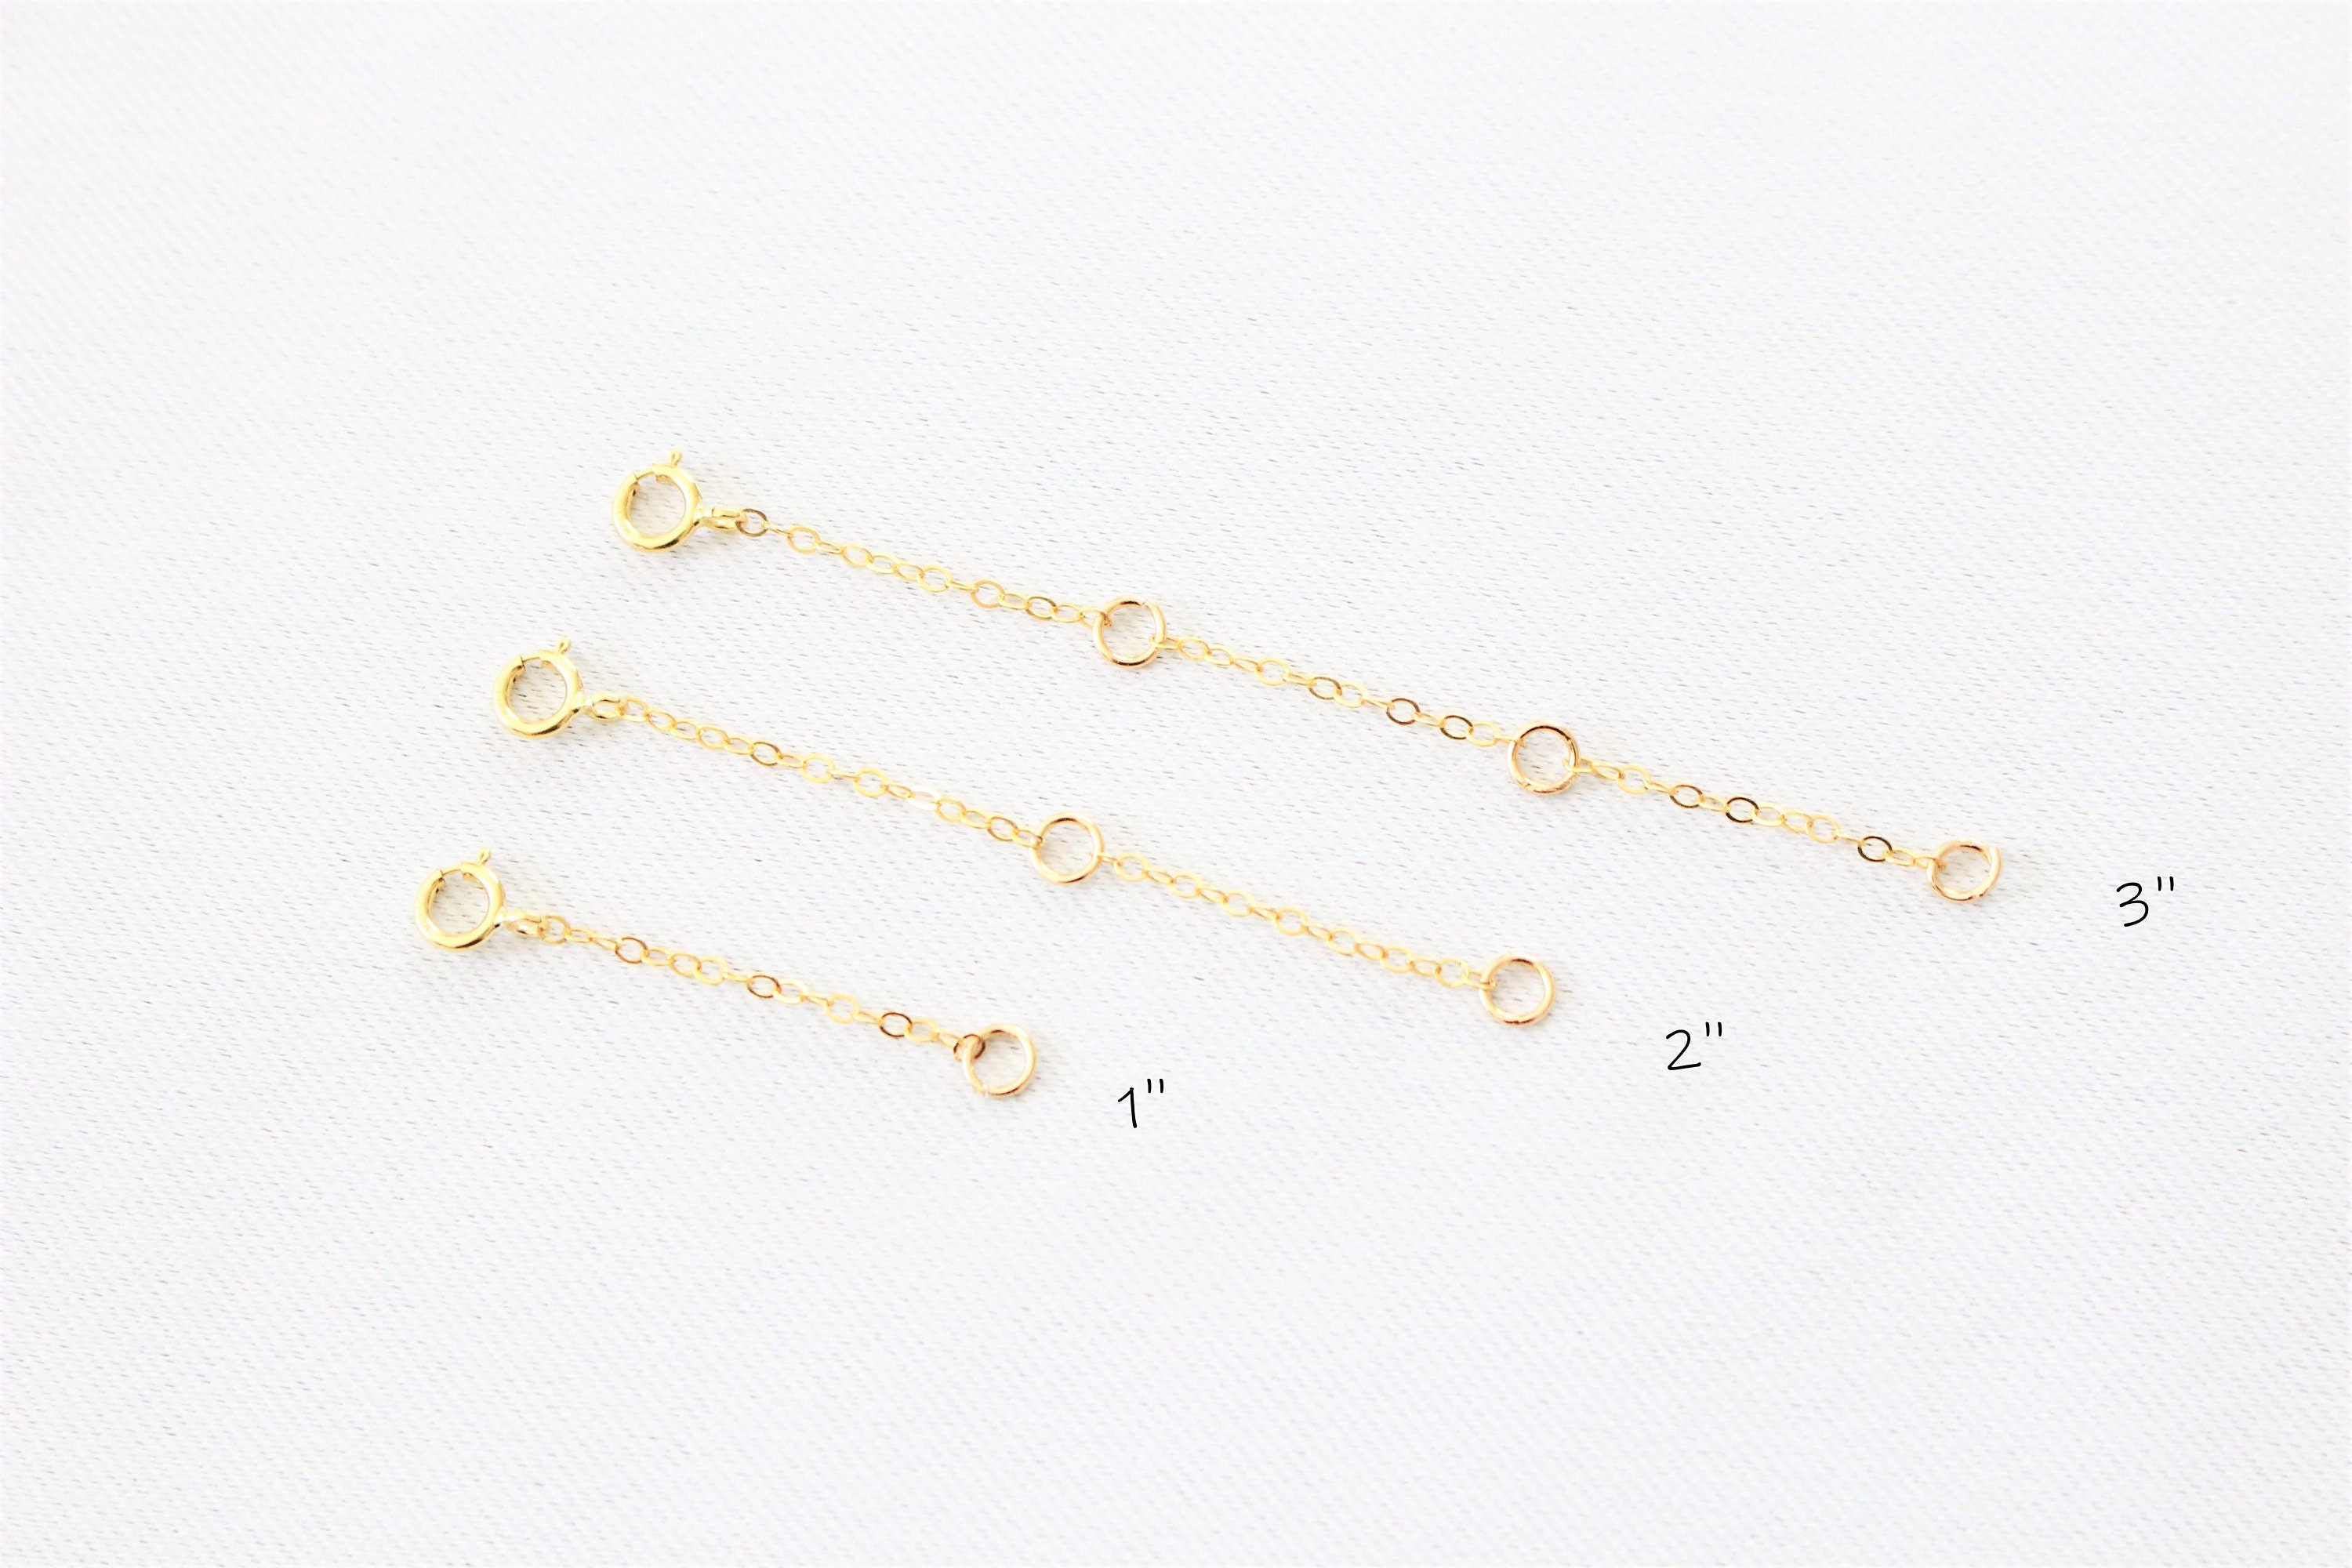  Didiseaon 1 Set Chain Extenders for Necklaces Gold